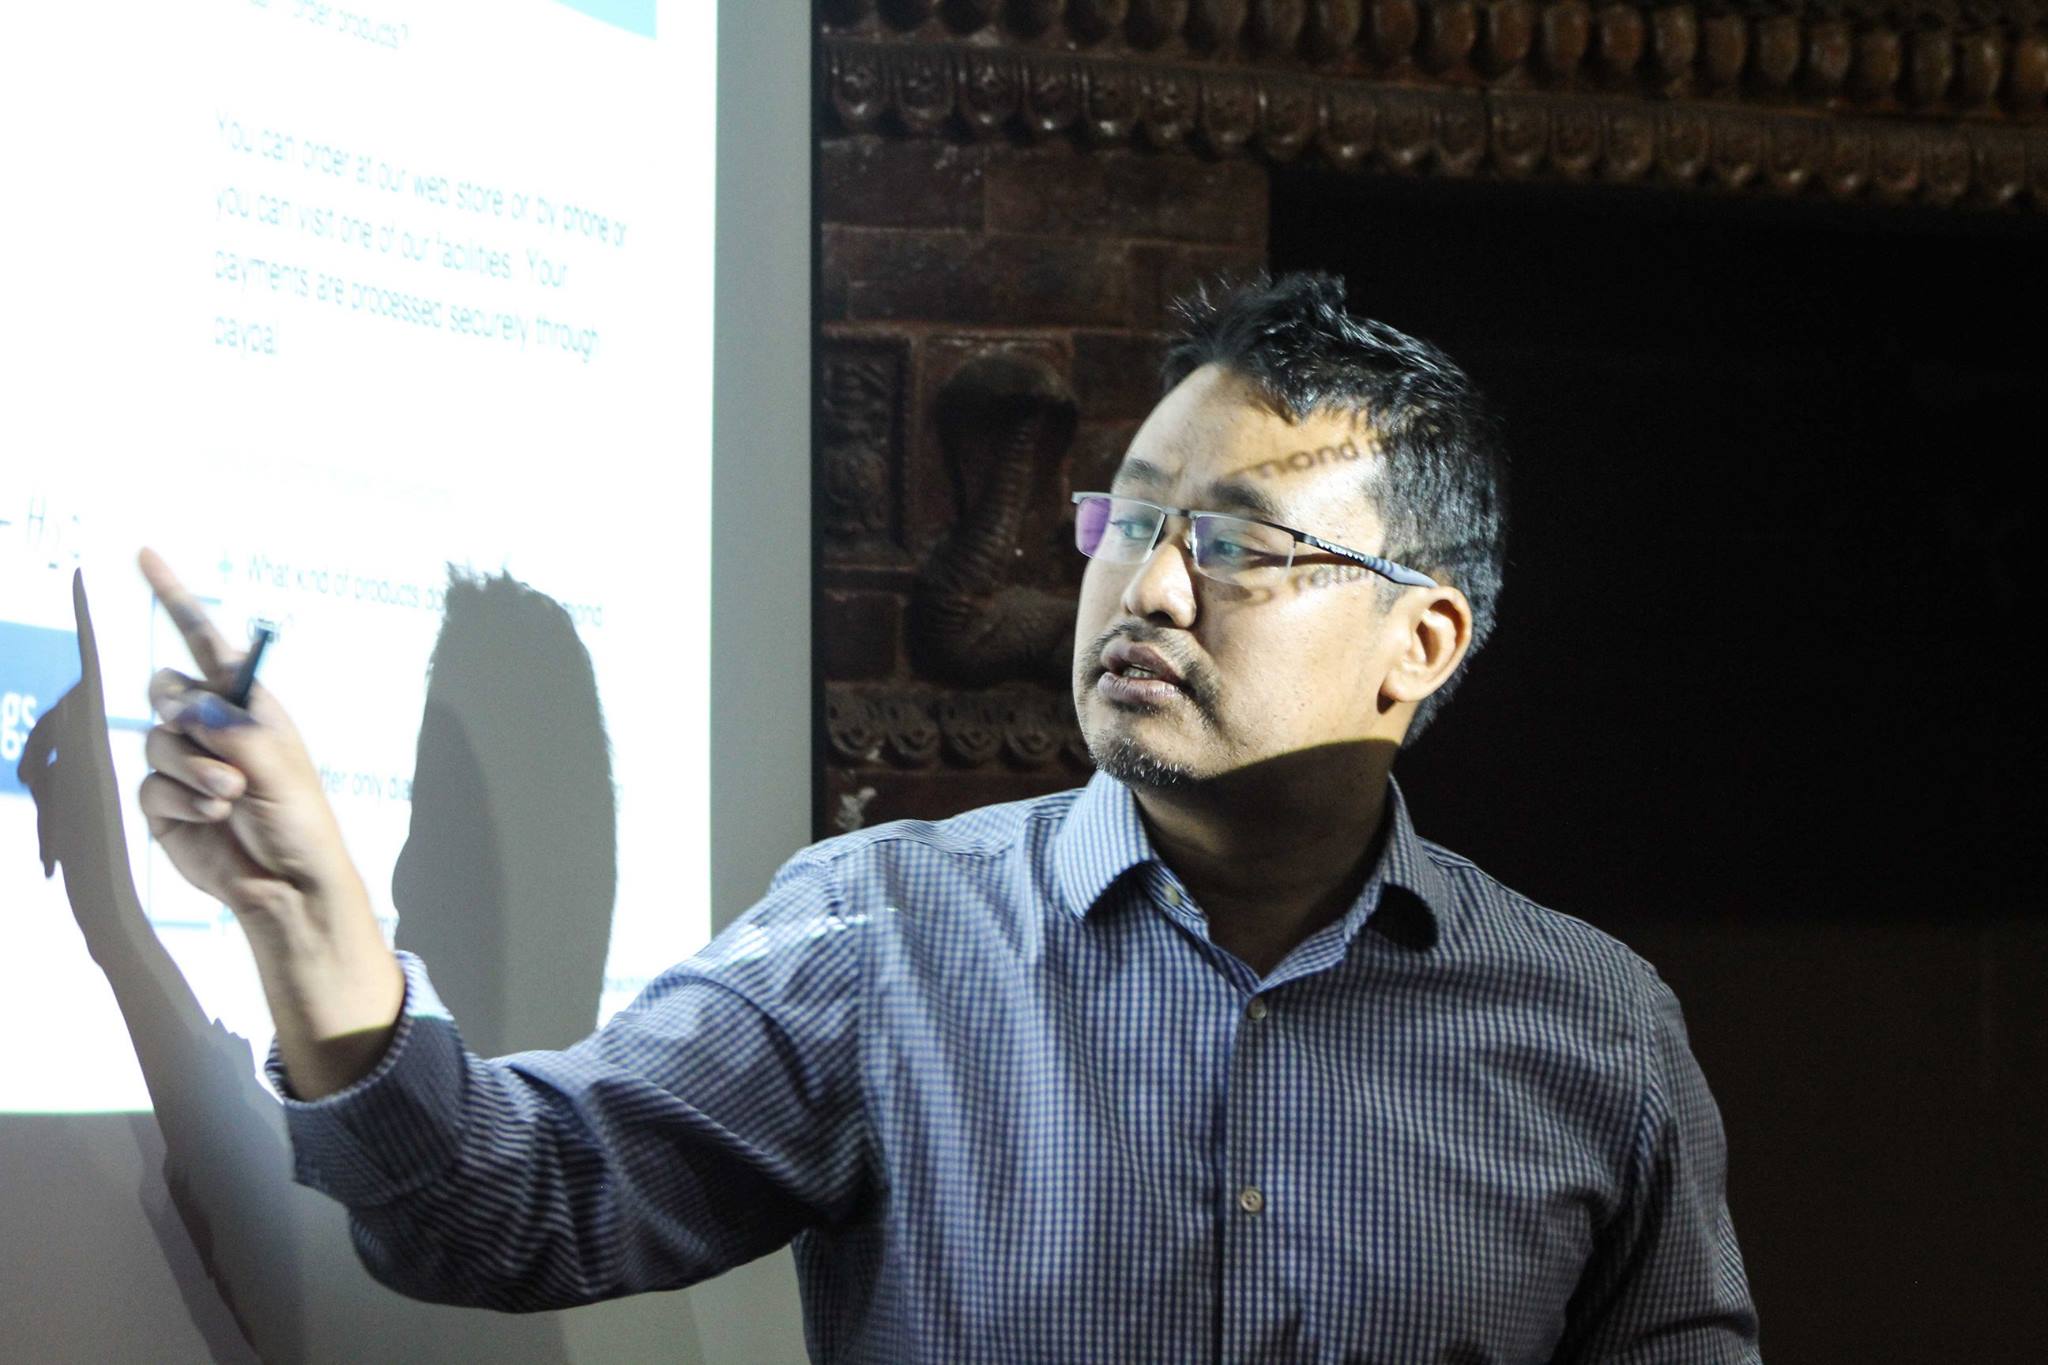 Founded by Dr. Sameer Maskey, Fusemachines Aims to Cultivate Data Scientists in Nepal